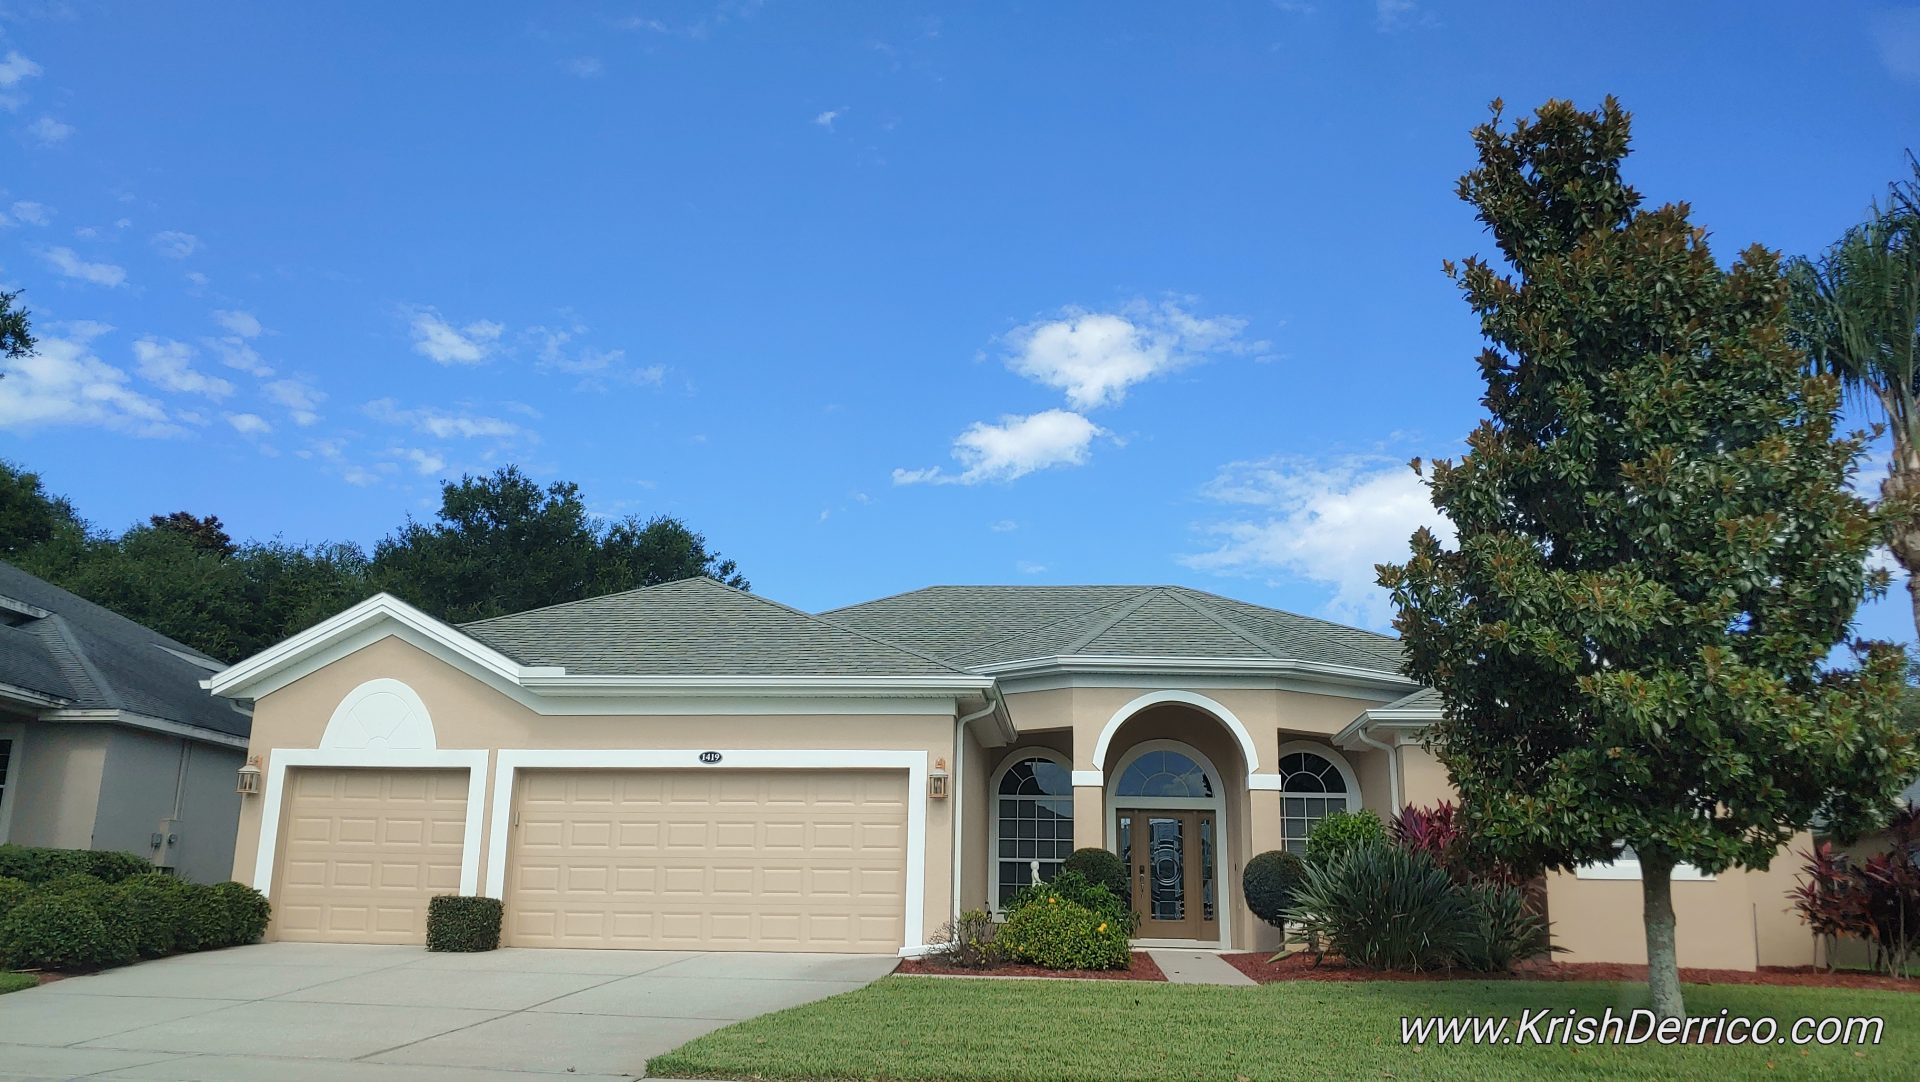 home values in legends clermont fl